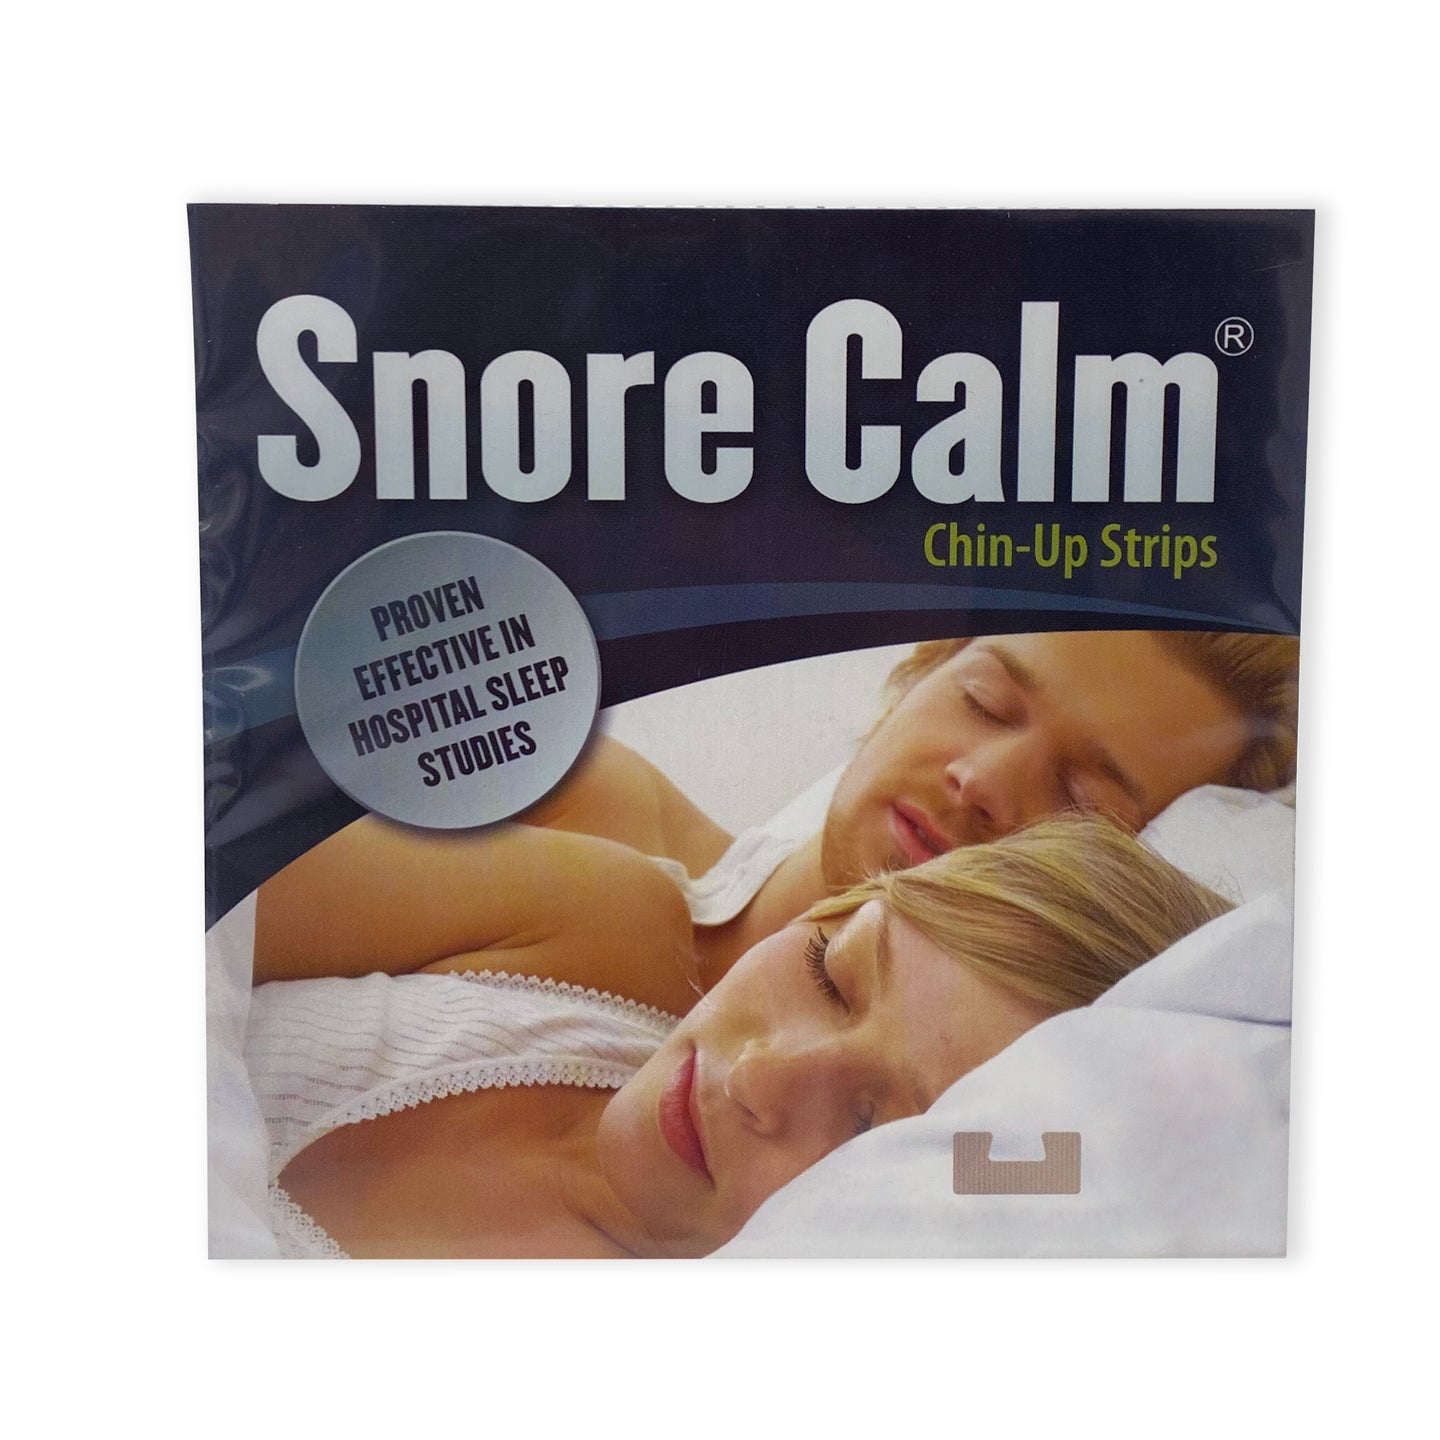 Snore Calm Chin-Up Strips (10 Pack)